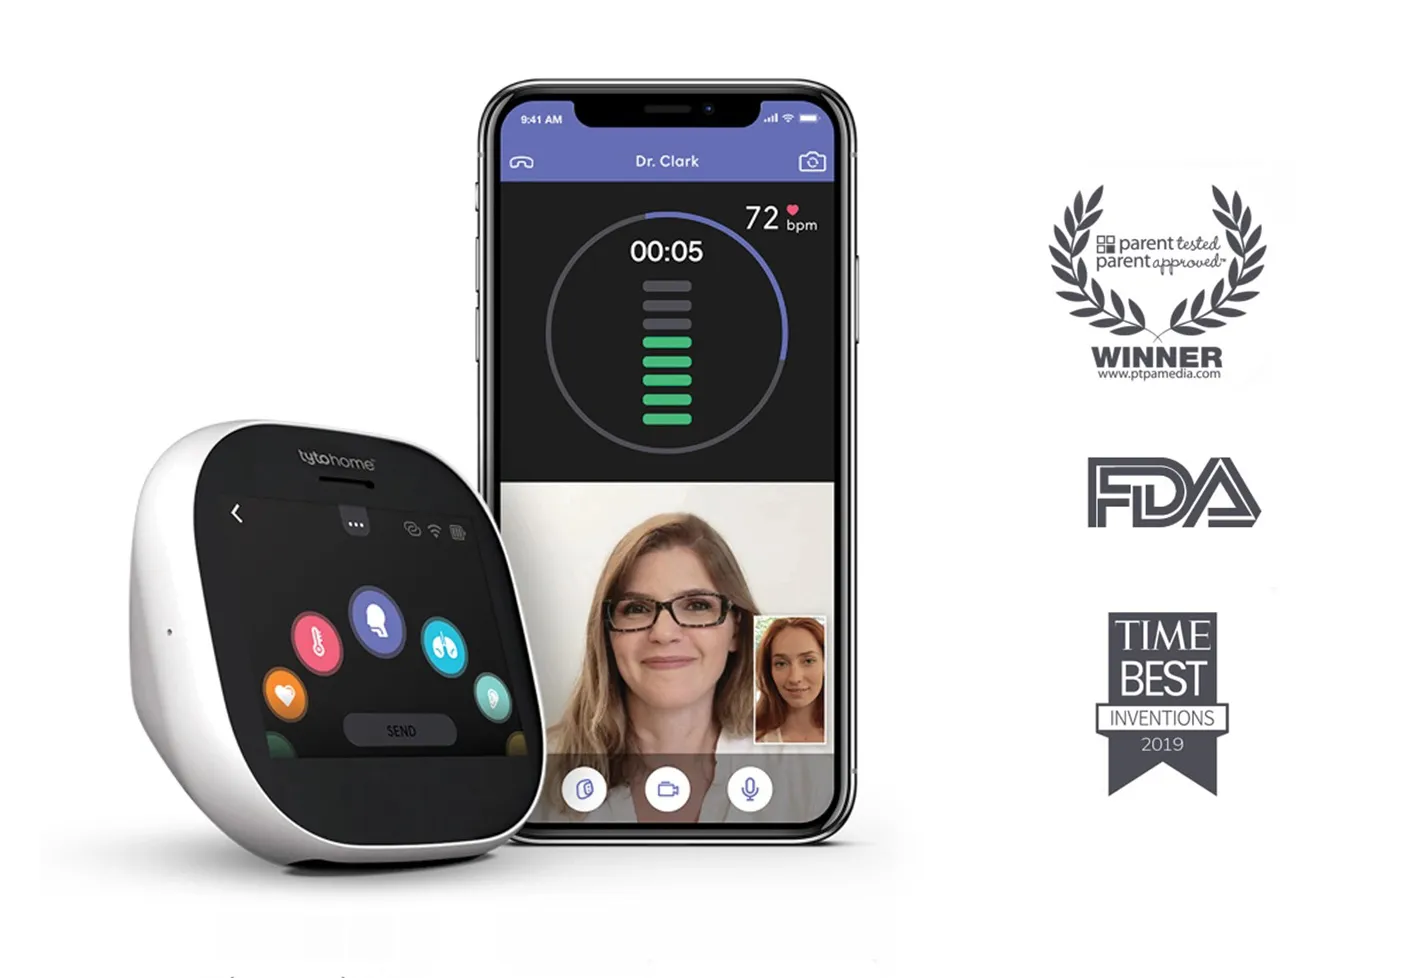 TytoHome device next to a smart phone showing a patient on a video visit with Dr. Clark. Also shown are the logos for 3 logos: Parent Tested Parent Approved (PTPA) winner, FDA, and Time: Best Inventions, 2019